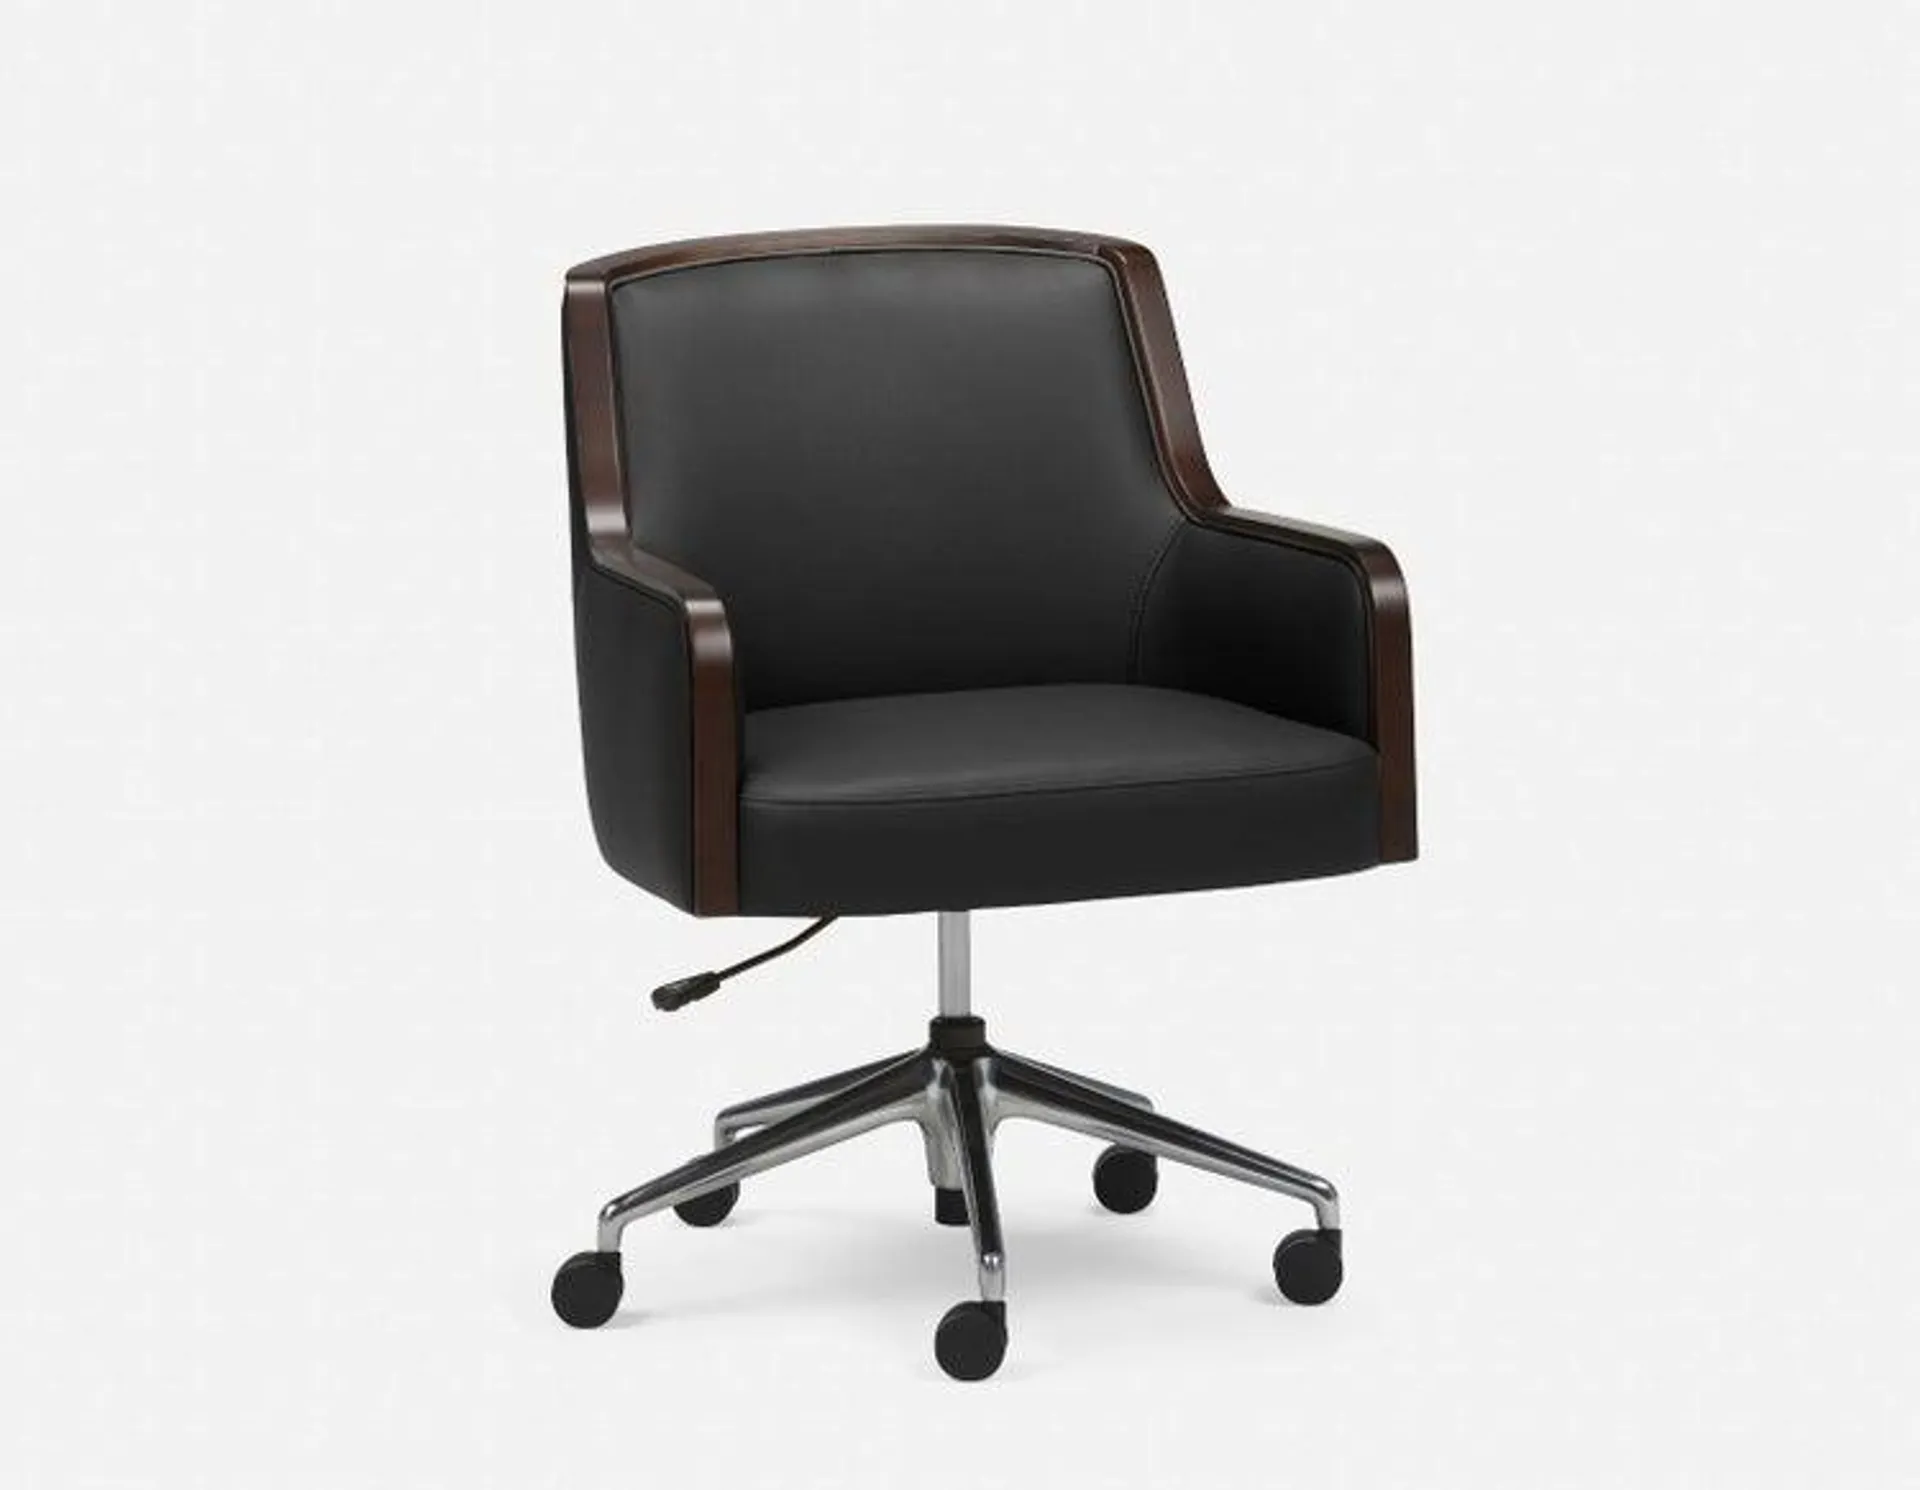 AUSTIN Curved wood office chair